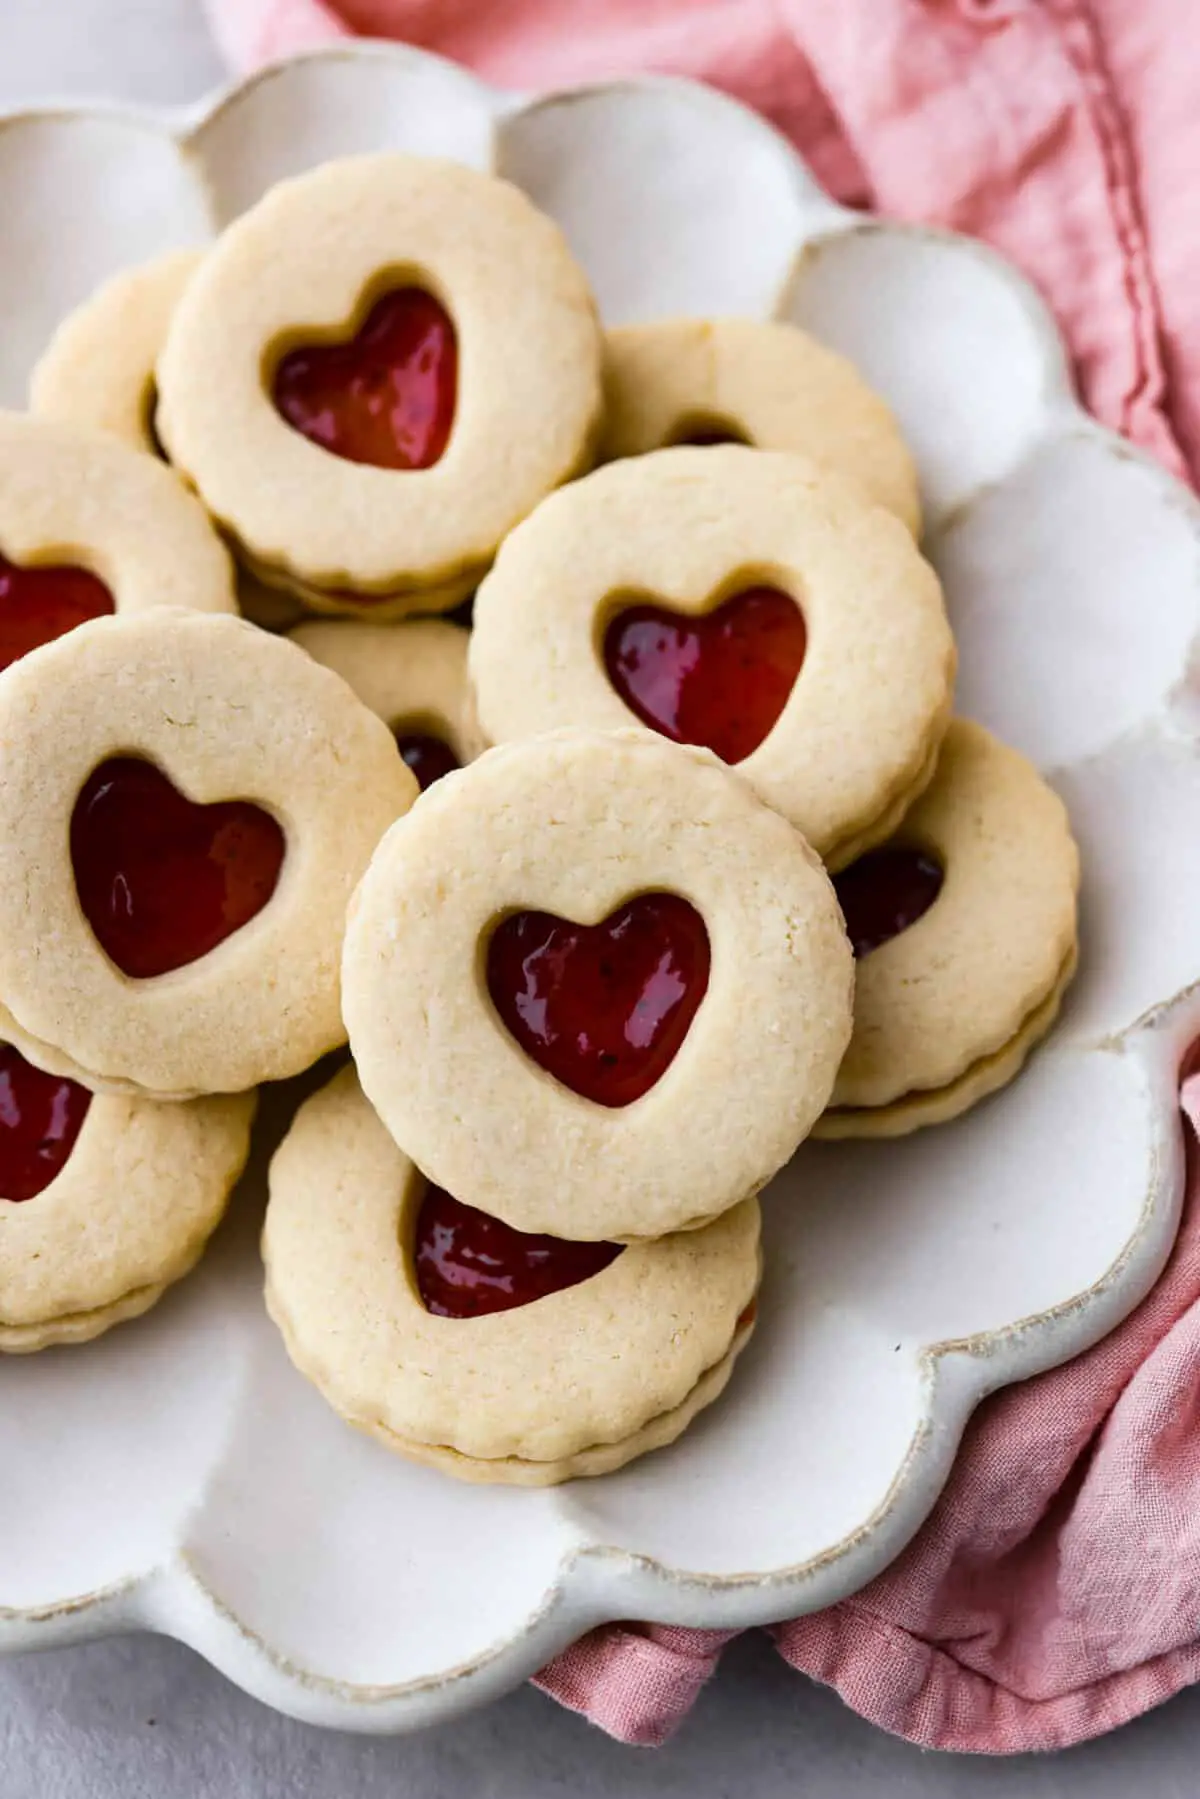 Cookies served in a white, scalloped dish. - Jammie Dodgers